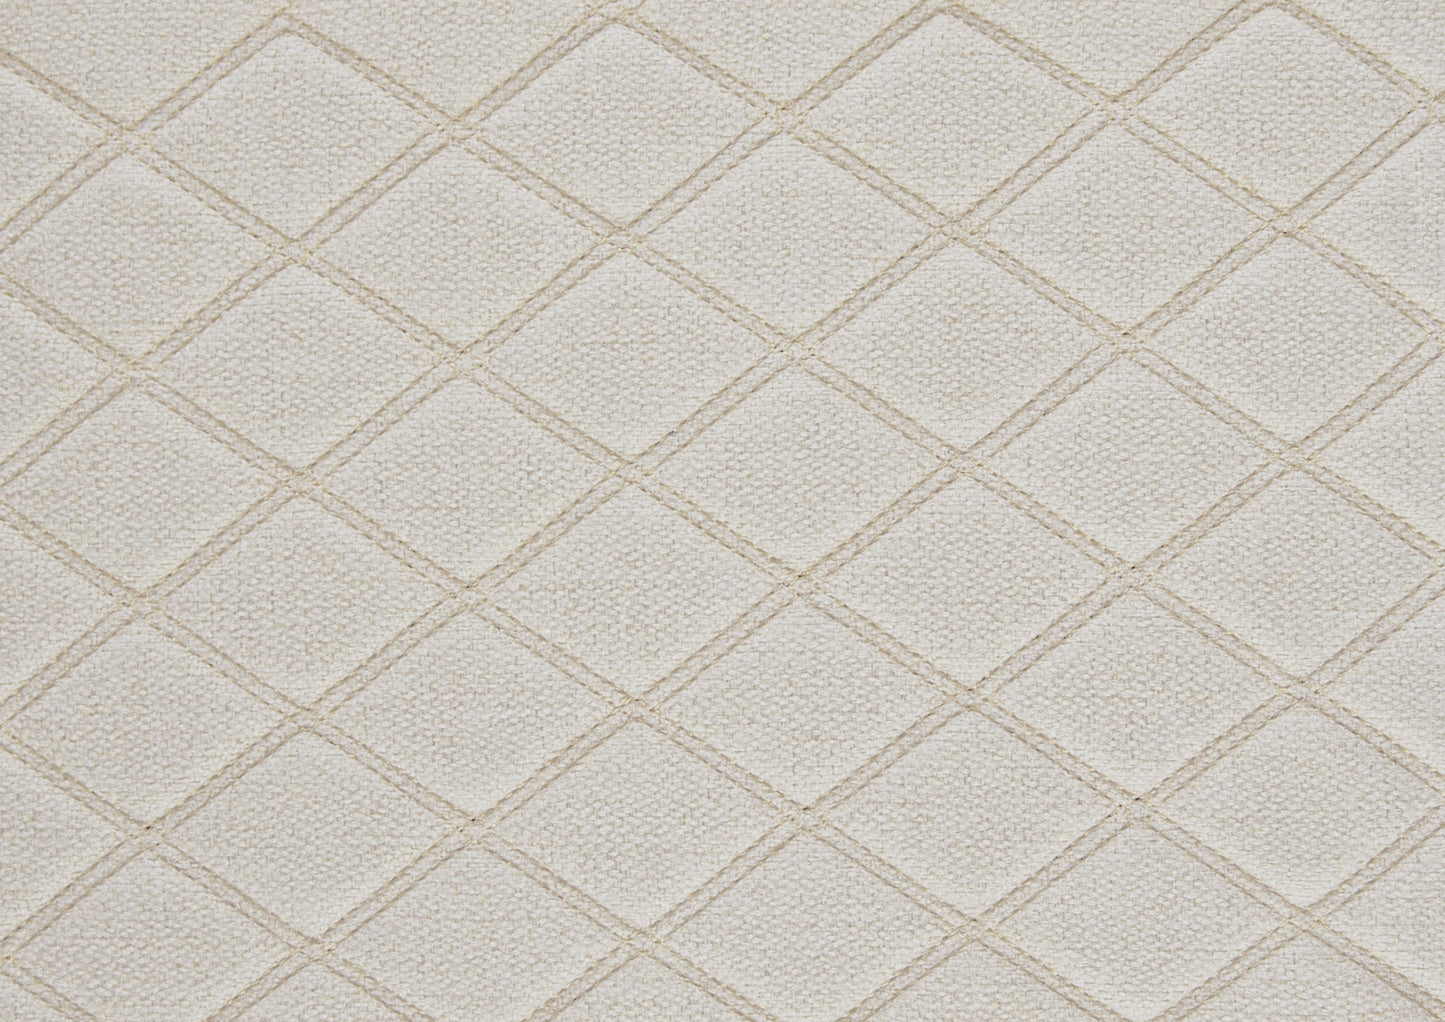 Avalon Beige Quilted Accent Chair